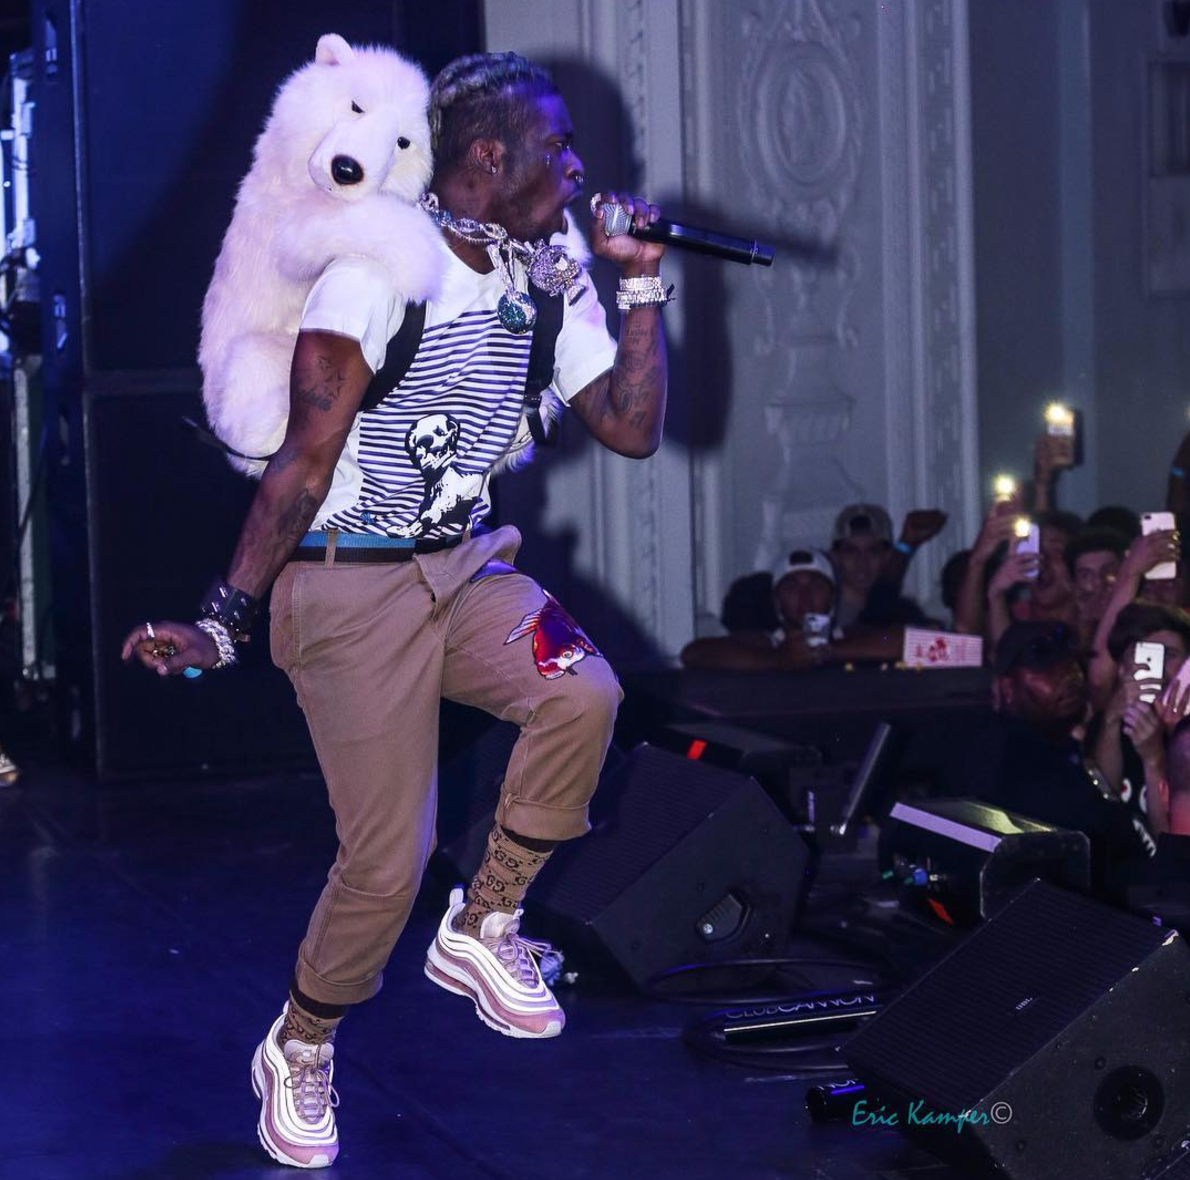 SPOTTED: Lil Uzi Vert In Chrome Hearts Official T-Shirt, Gucci Socks And Nike Air Max 97 Sneakers